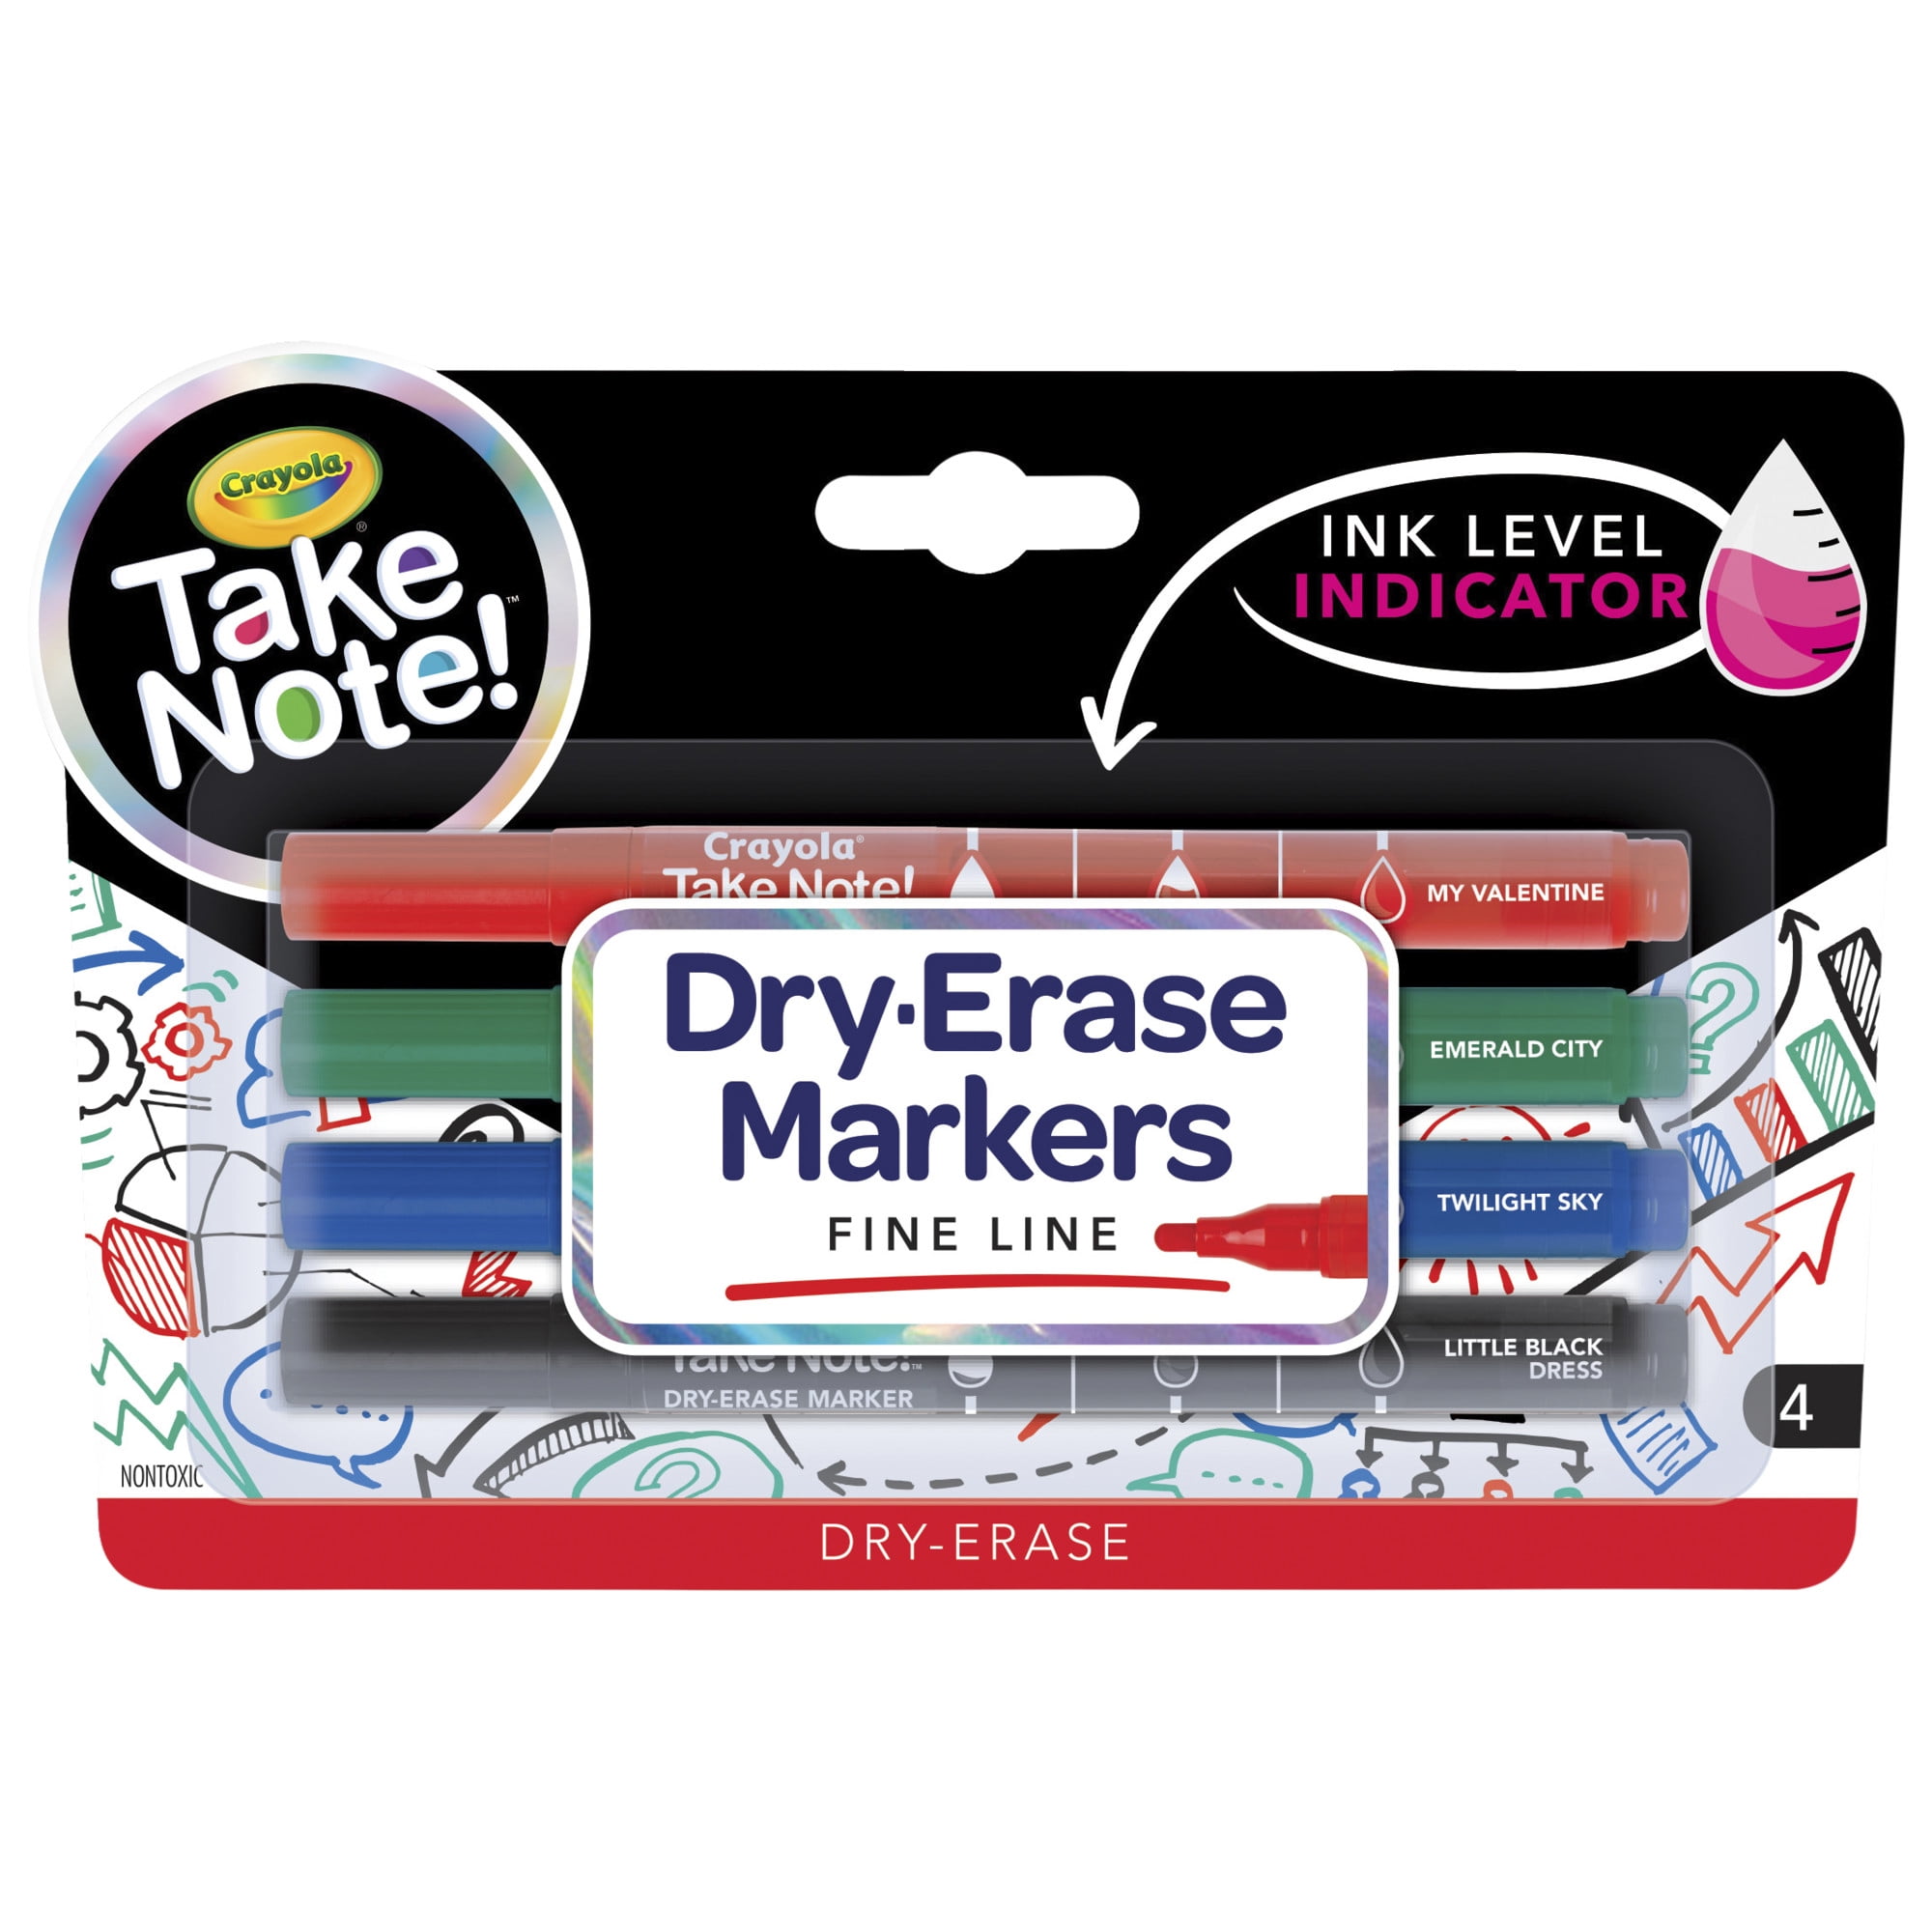 Take Note! Dry Erase Markers